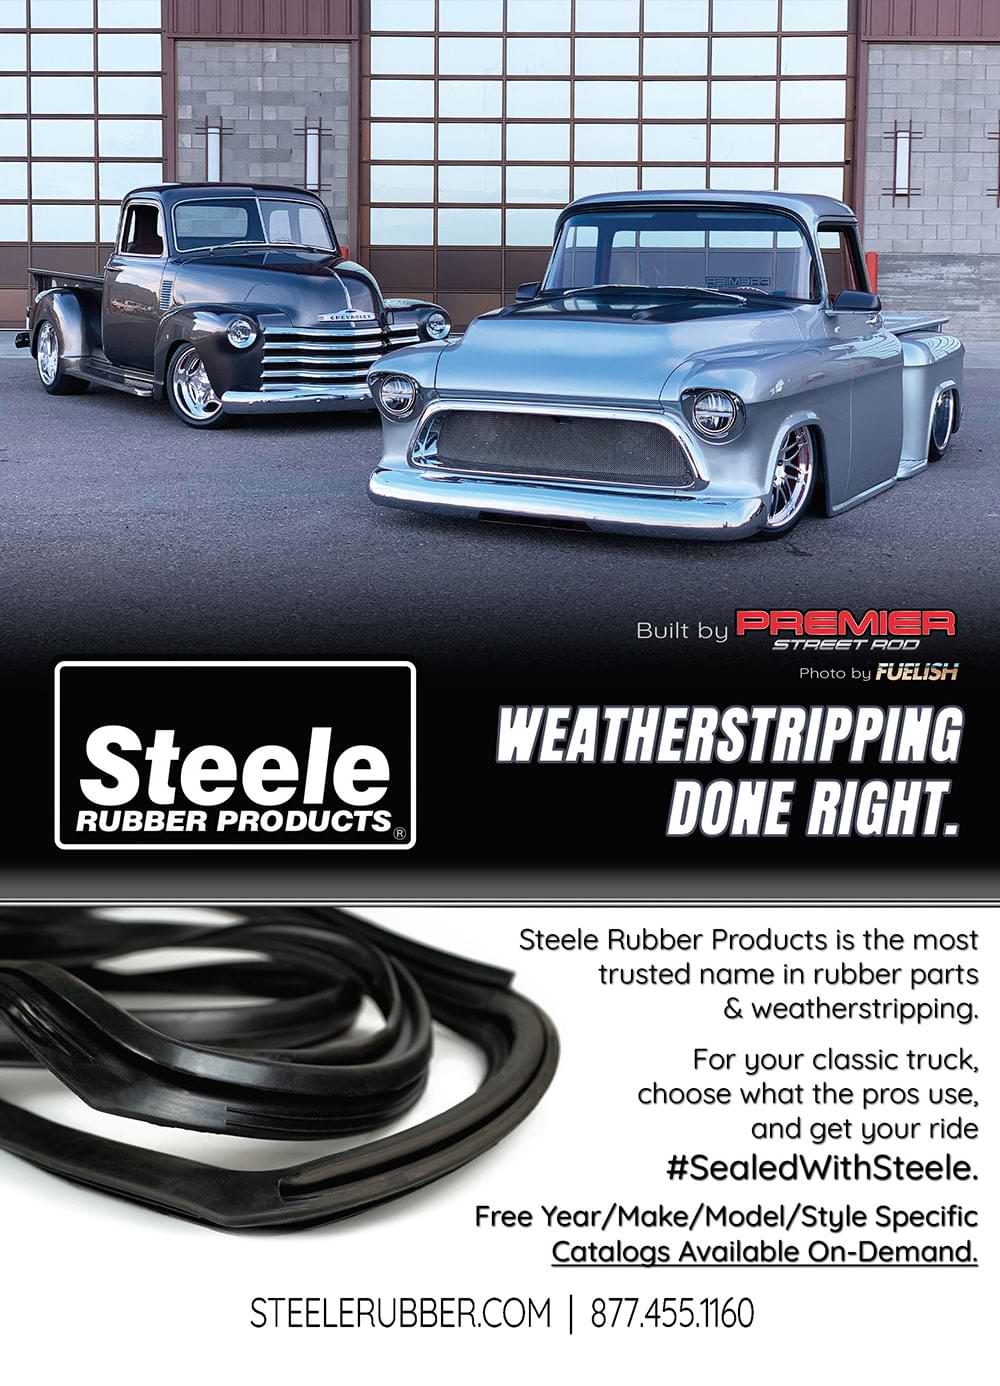 Steele Rubber Products